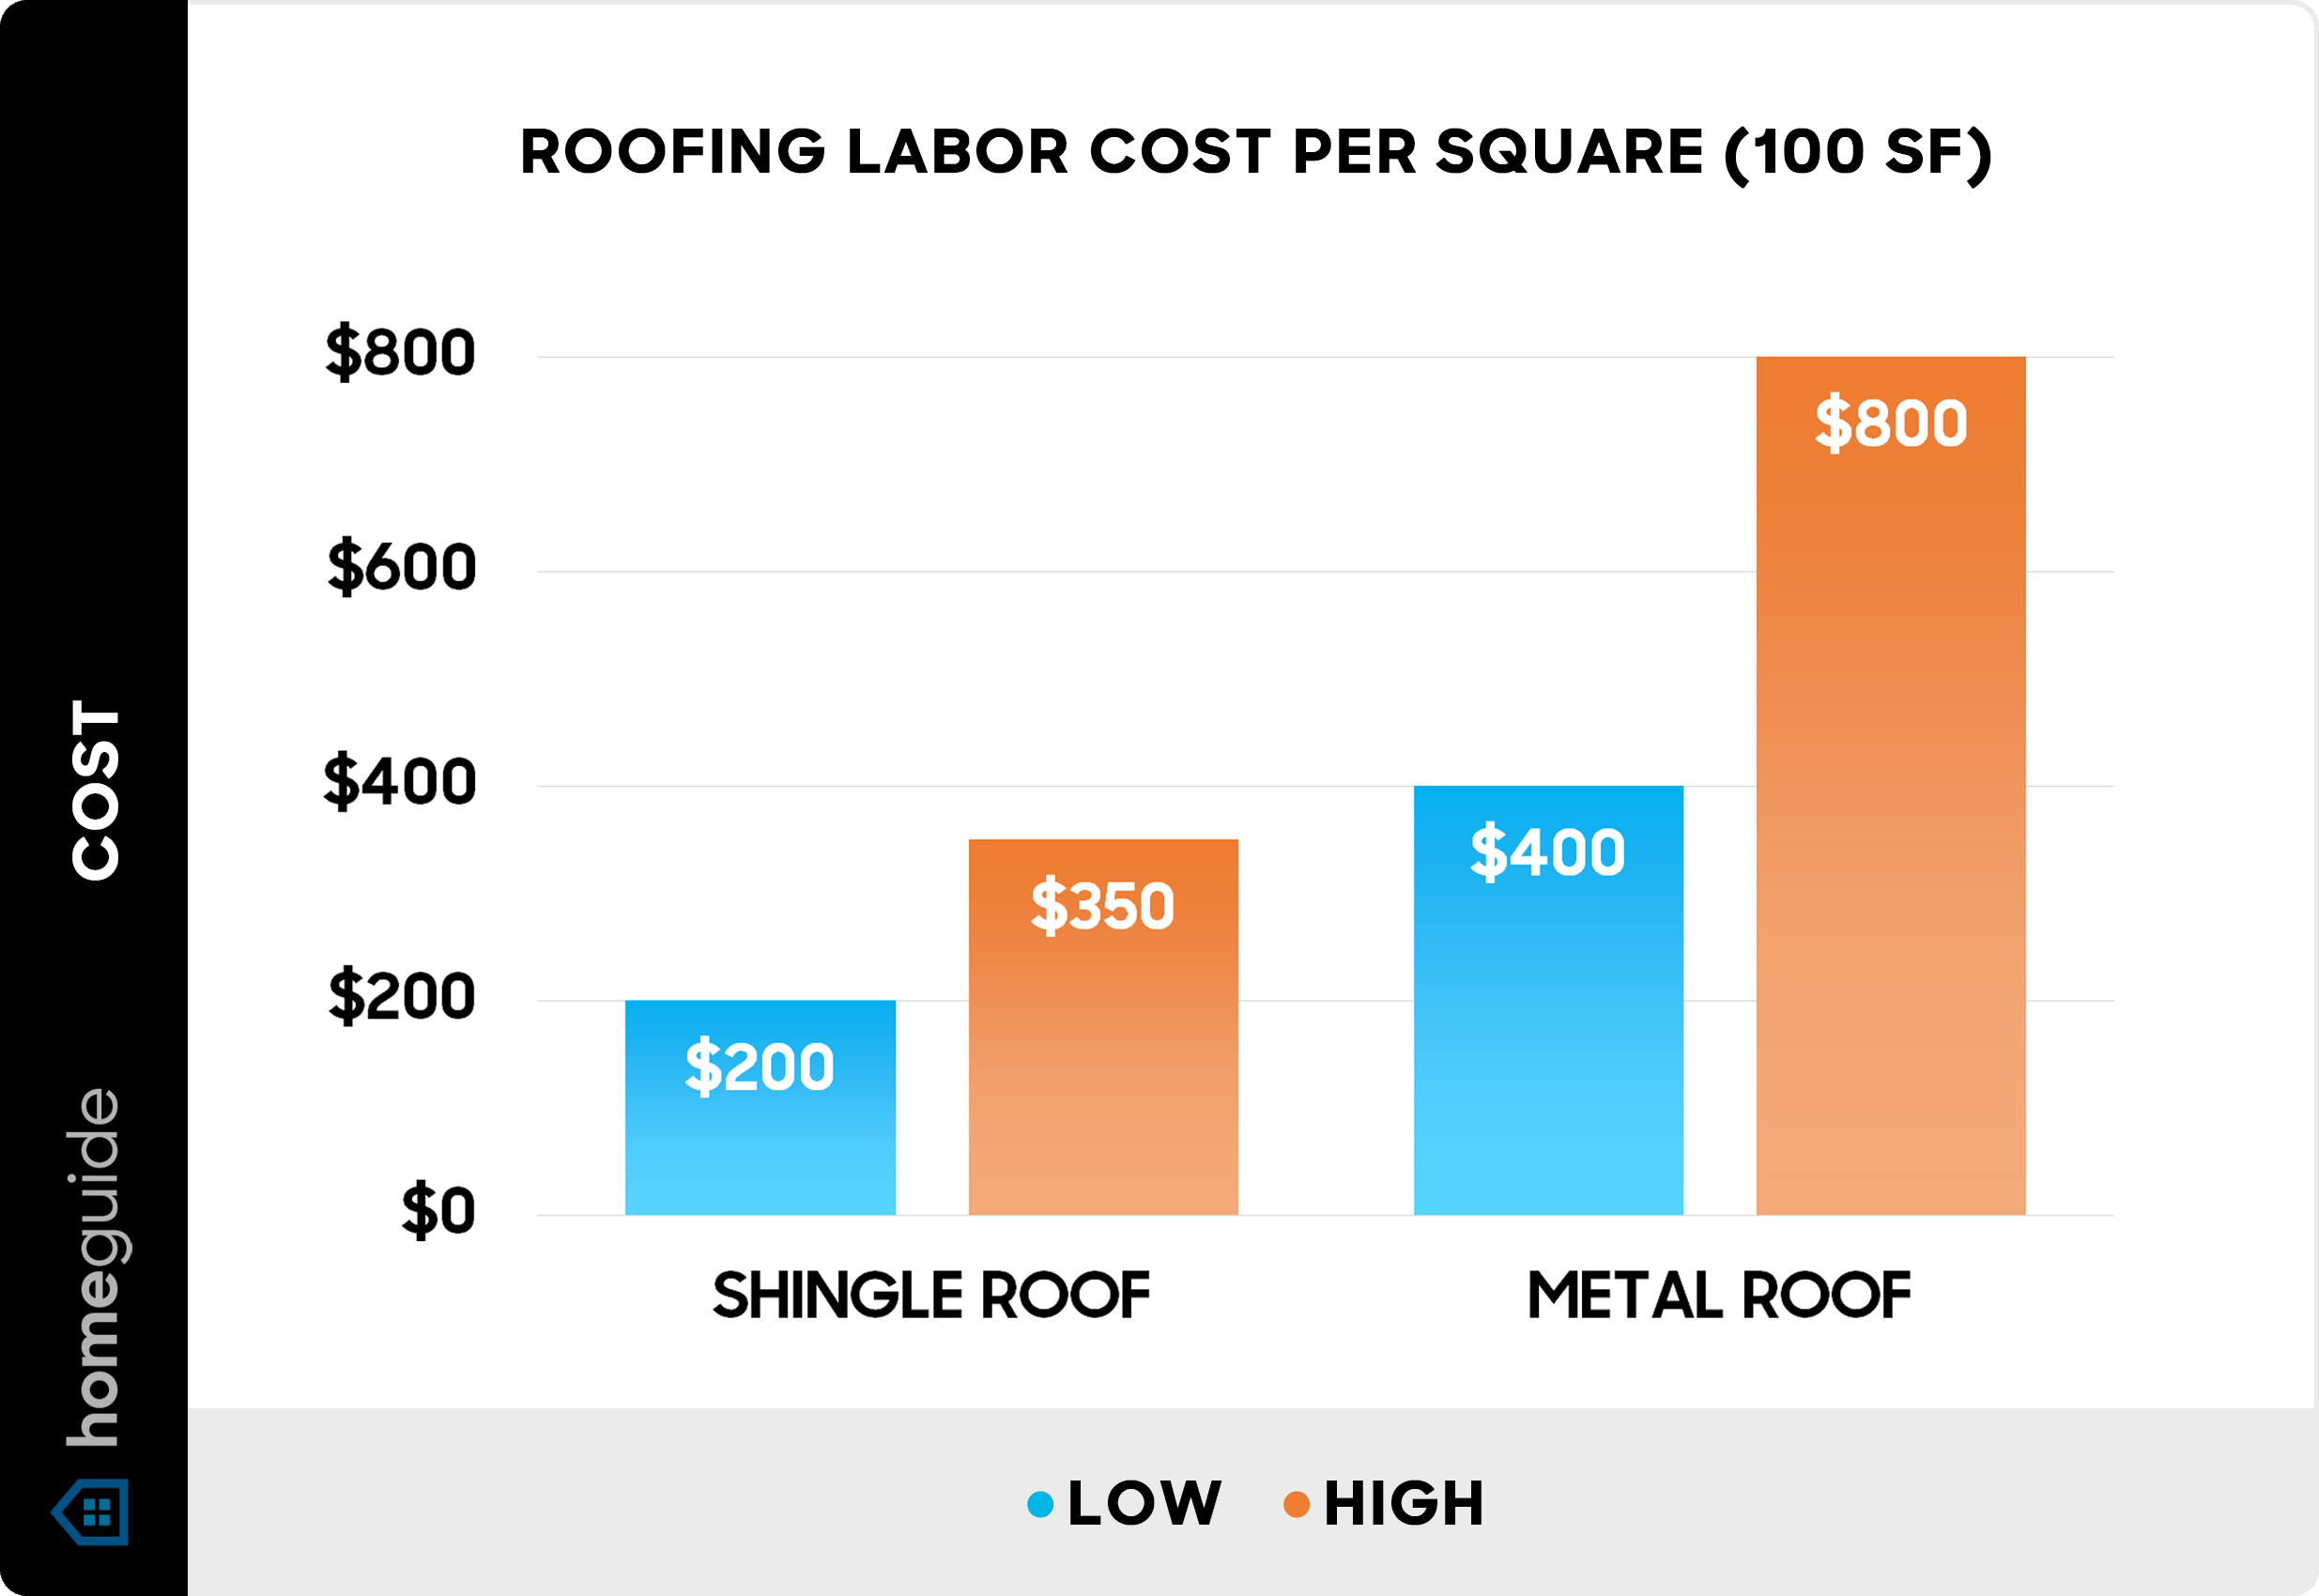 How Much Is Roofing Per Square Foot?